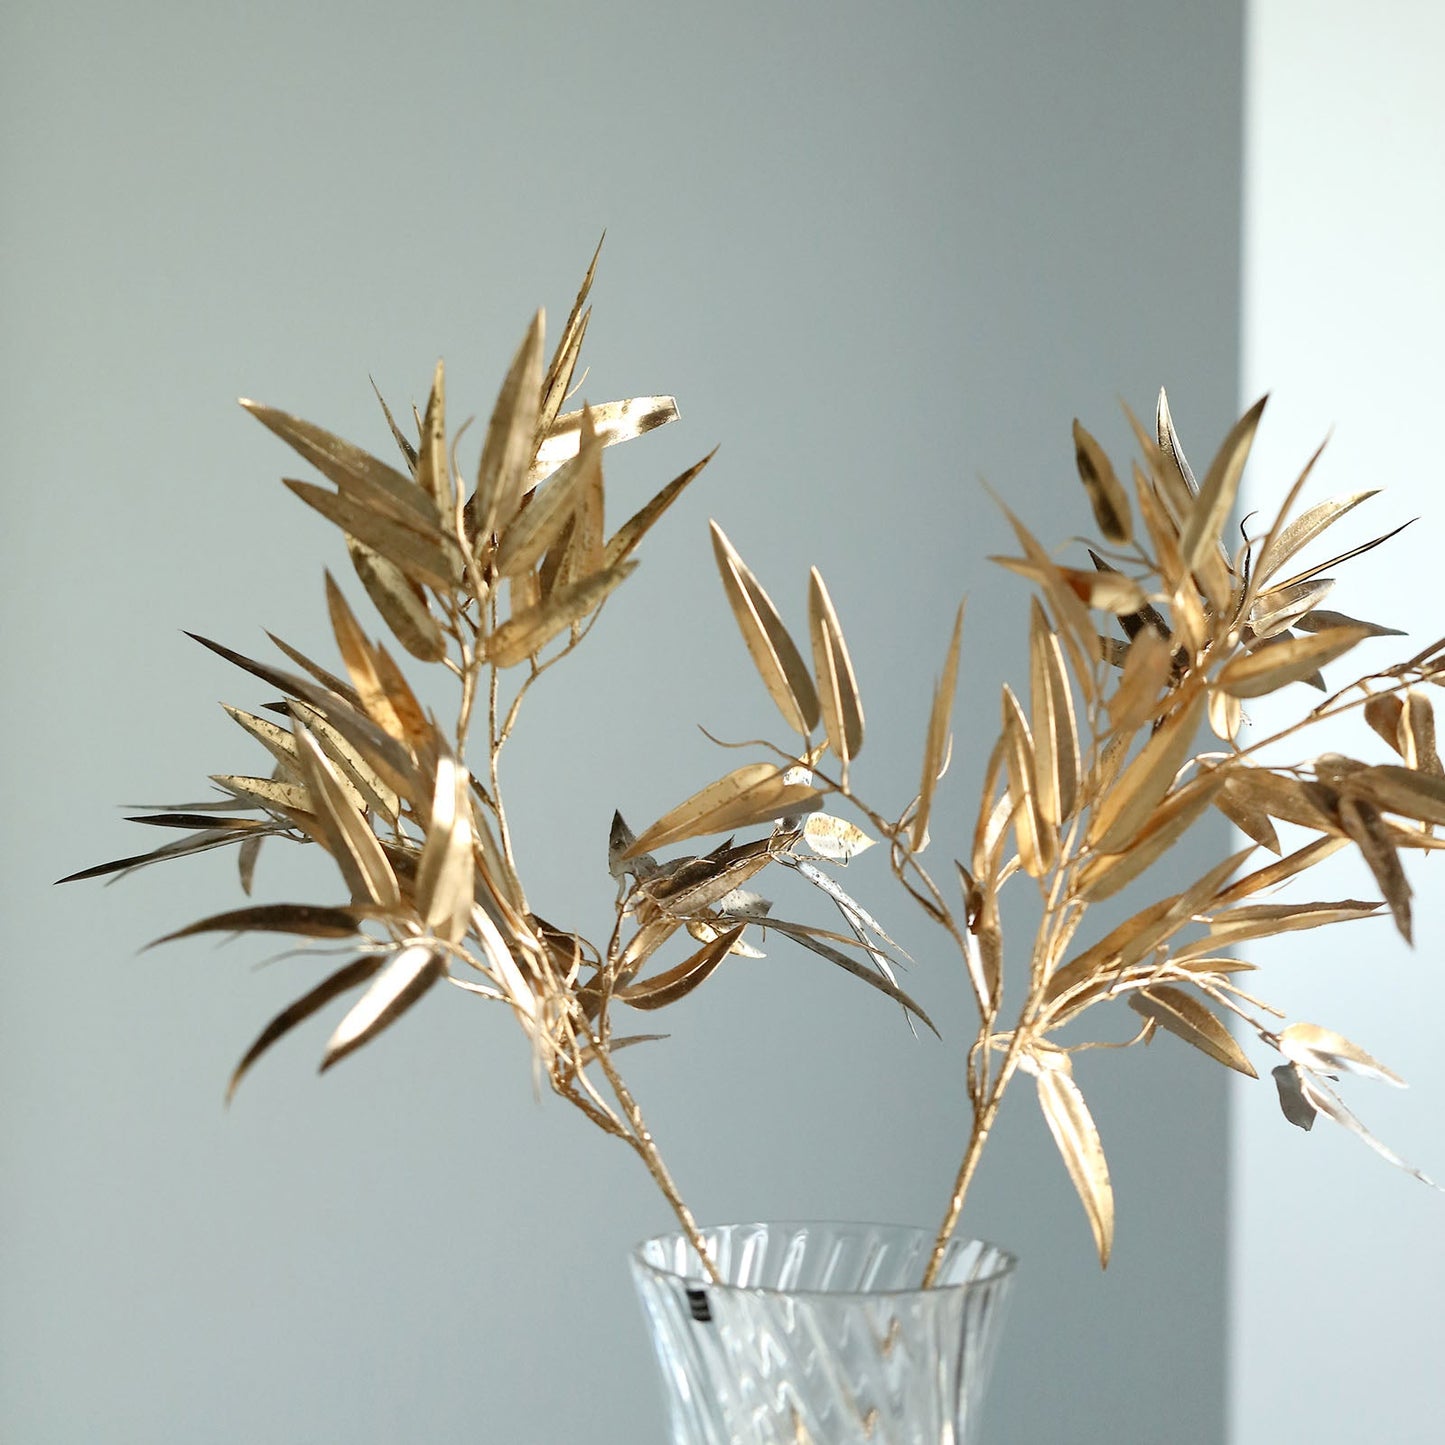 2 Pack Shiny Metallic Gold Faux Plant Arrangement Floral Stems, Artificial Bamboo Leaf Branches 33"